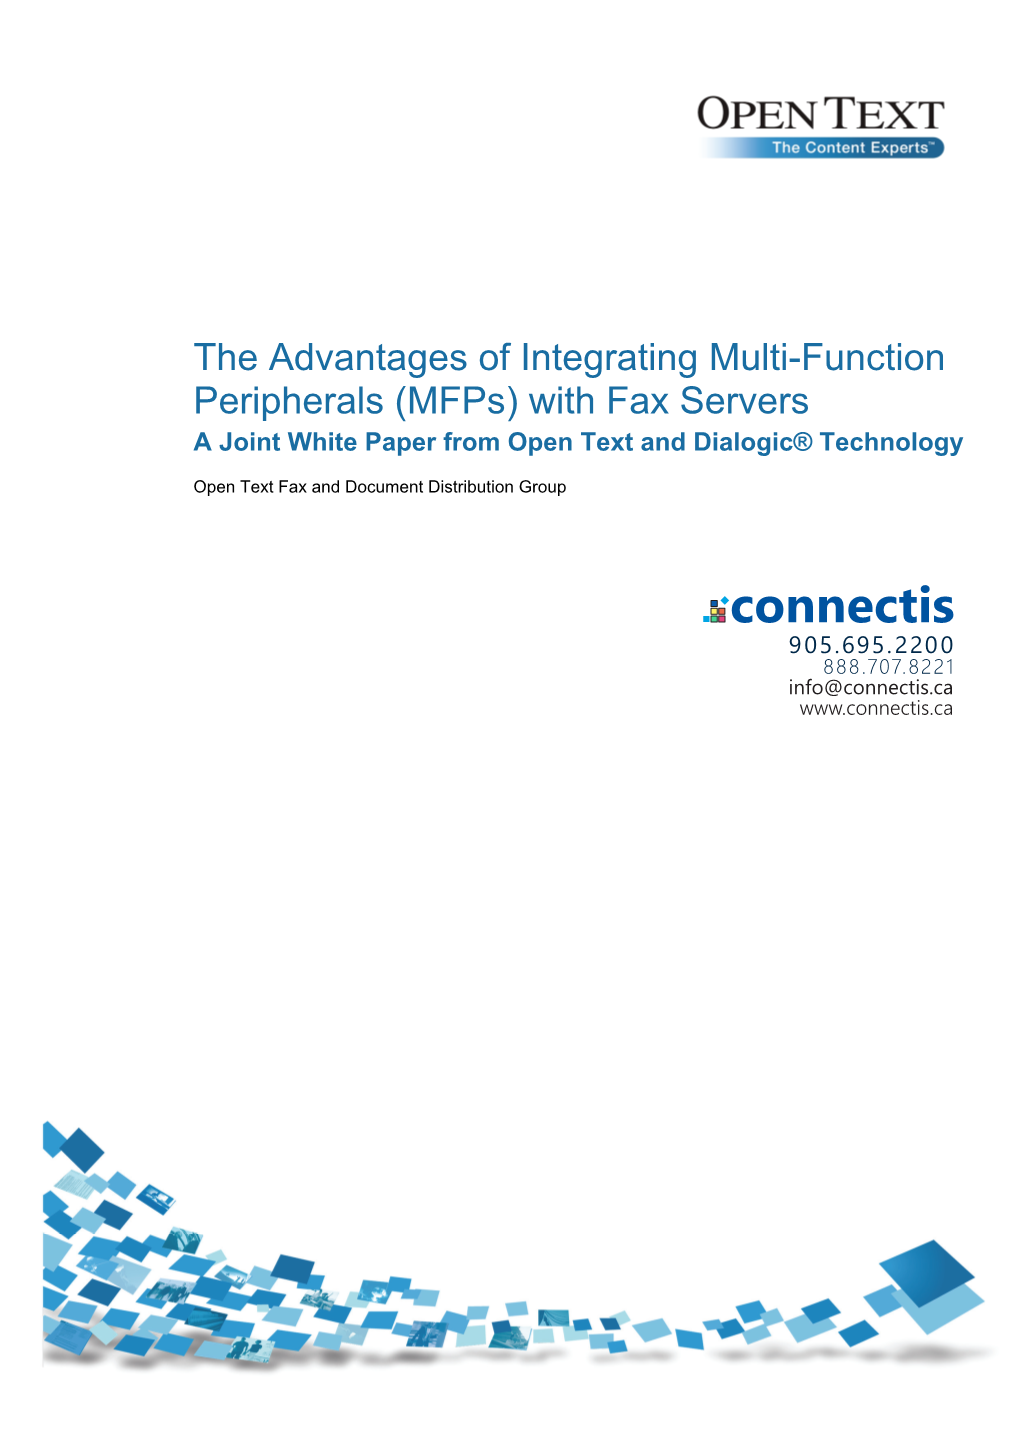 The Advantages of Integrating Multi-Function Peripherals (Mfps) with Fax Servers a Joint White Paper from Open Text and Dialogic® Technology